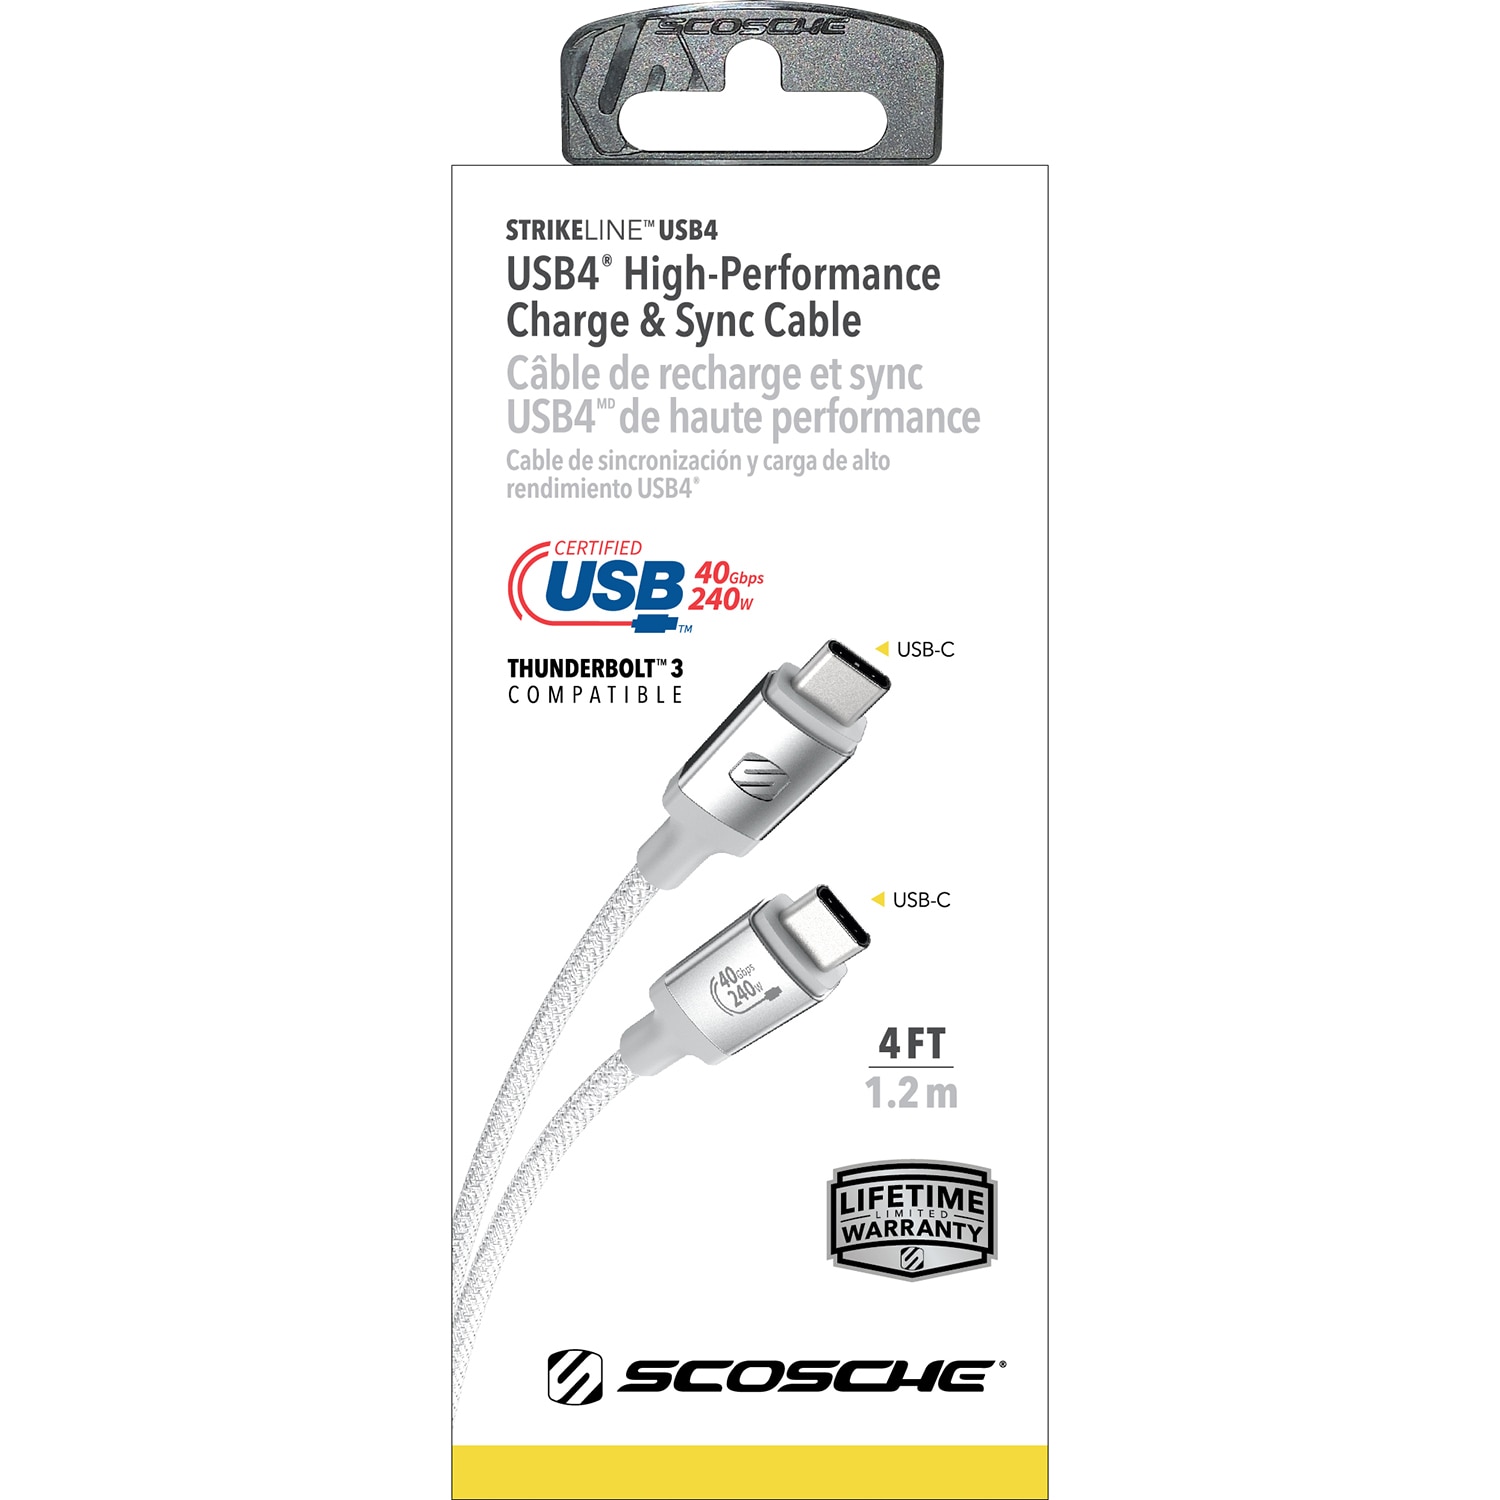 Strikeline USBC High Speed Cable- White